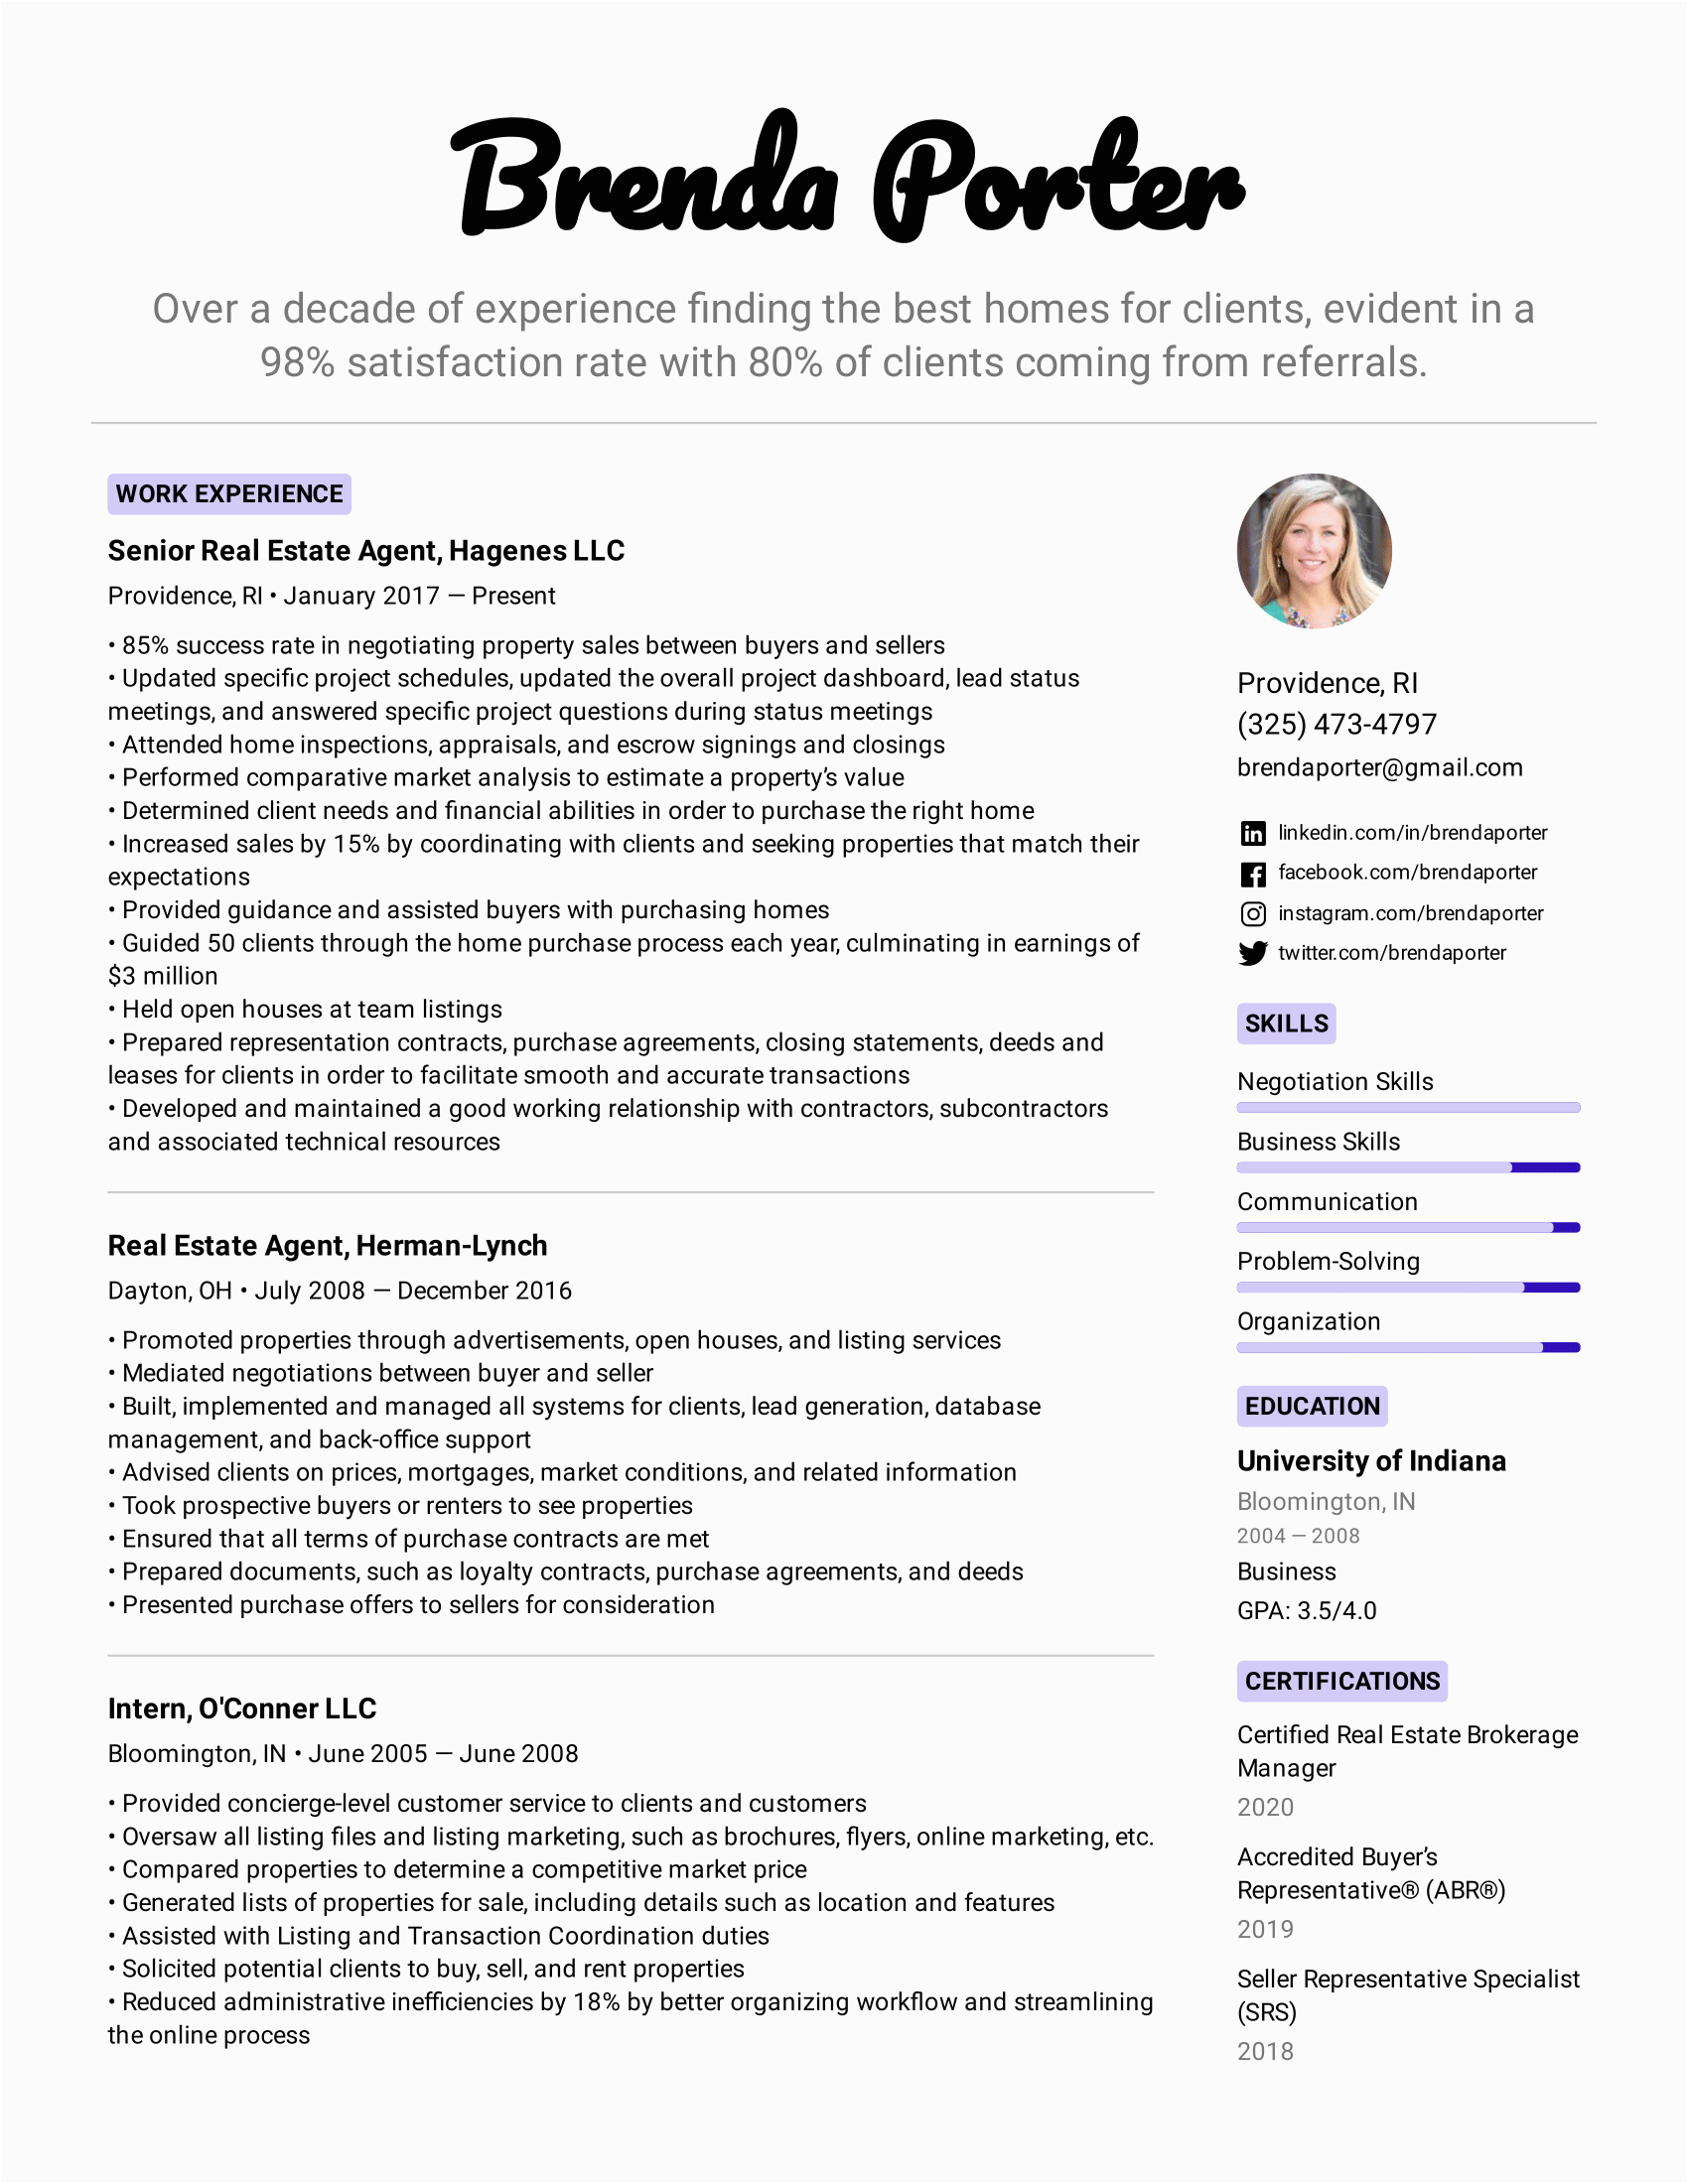 Resume Sample for Real Estate Agent with Experience Real Estate Agent Resume Example & Writing Tips for 2020